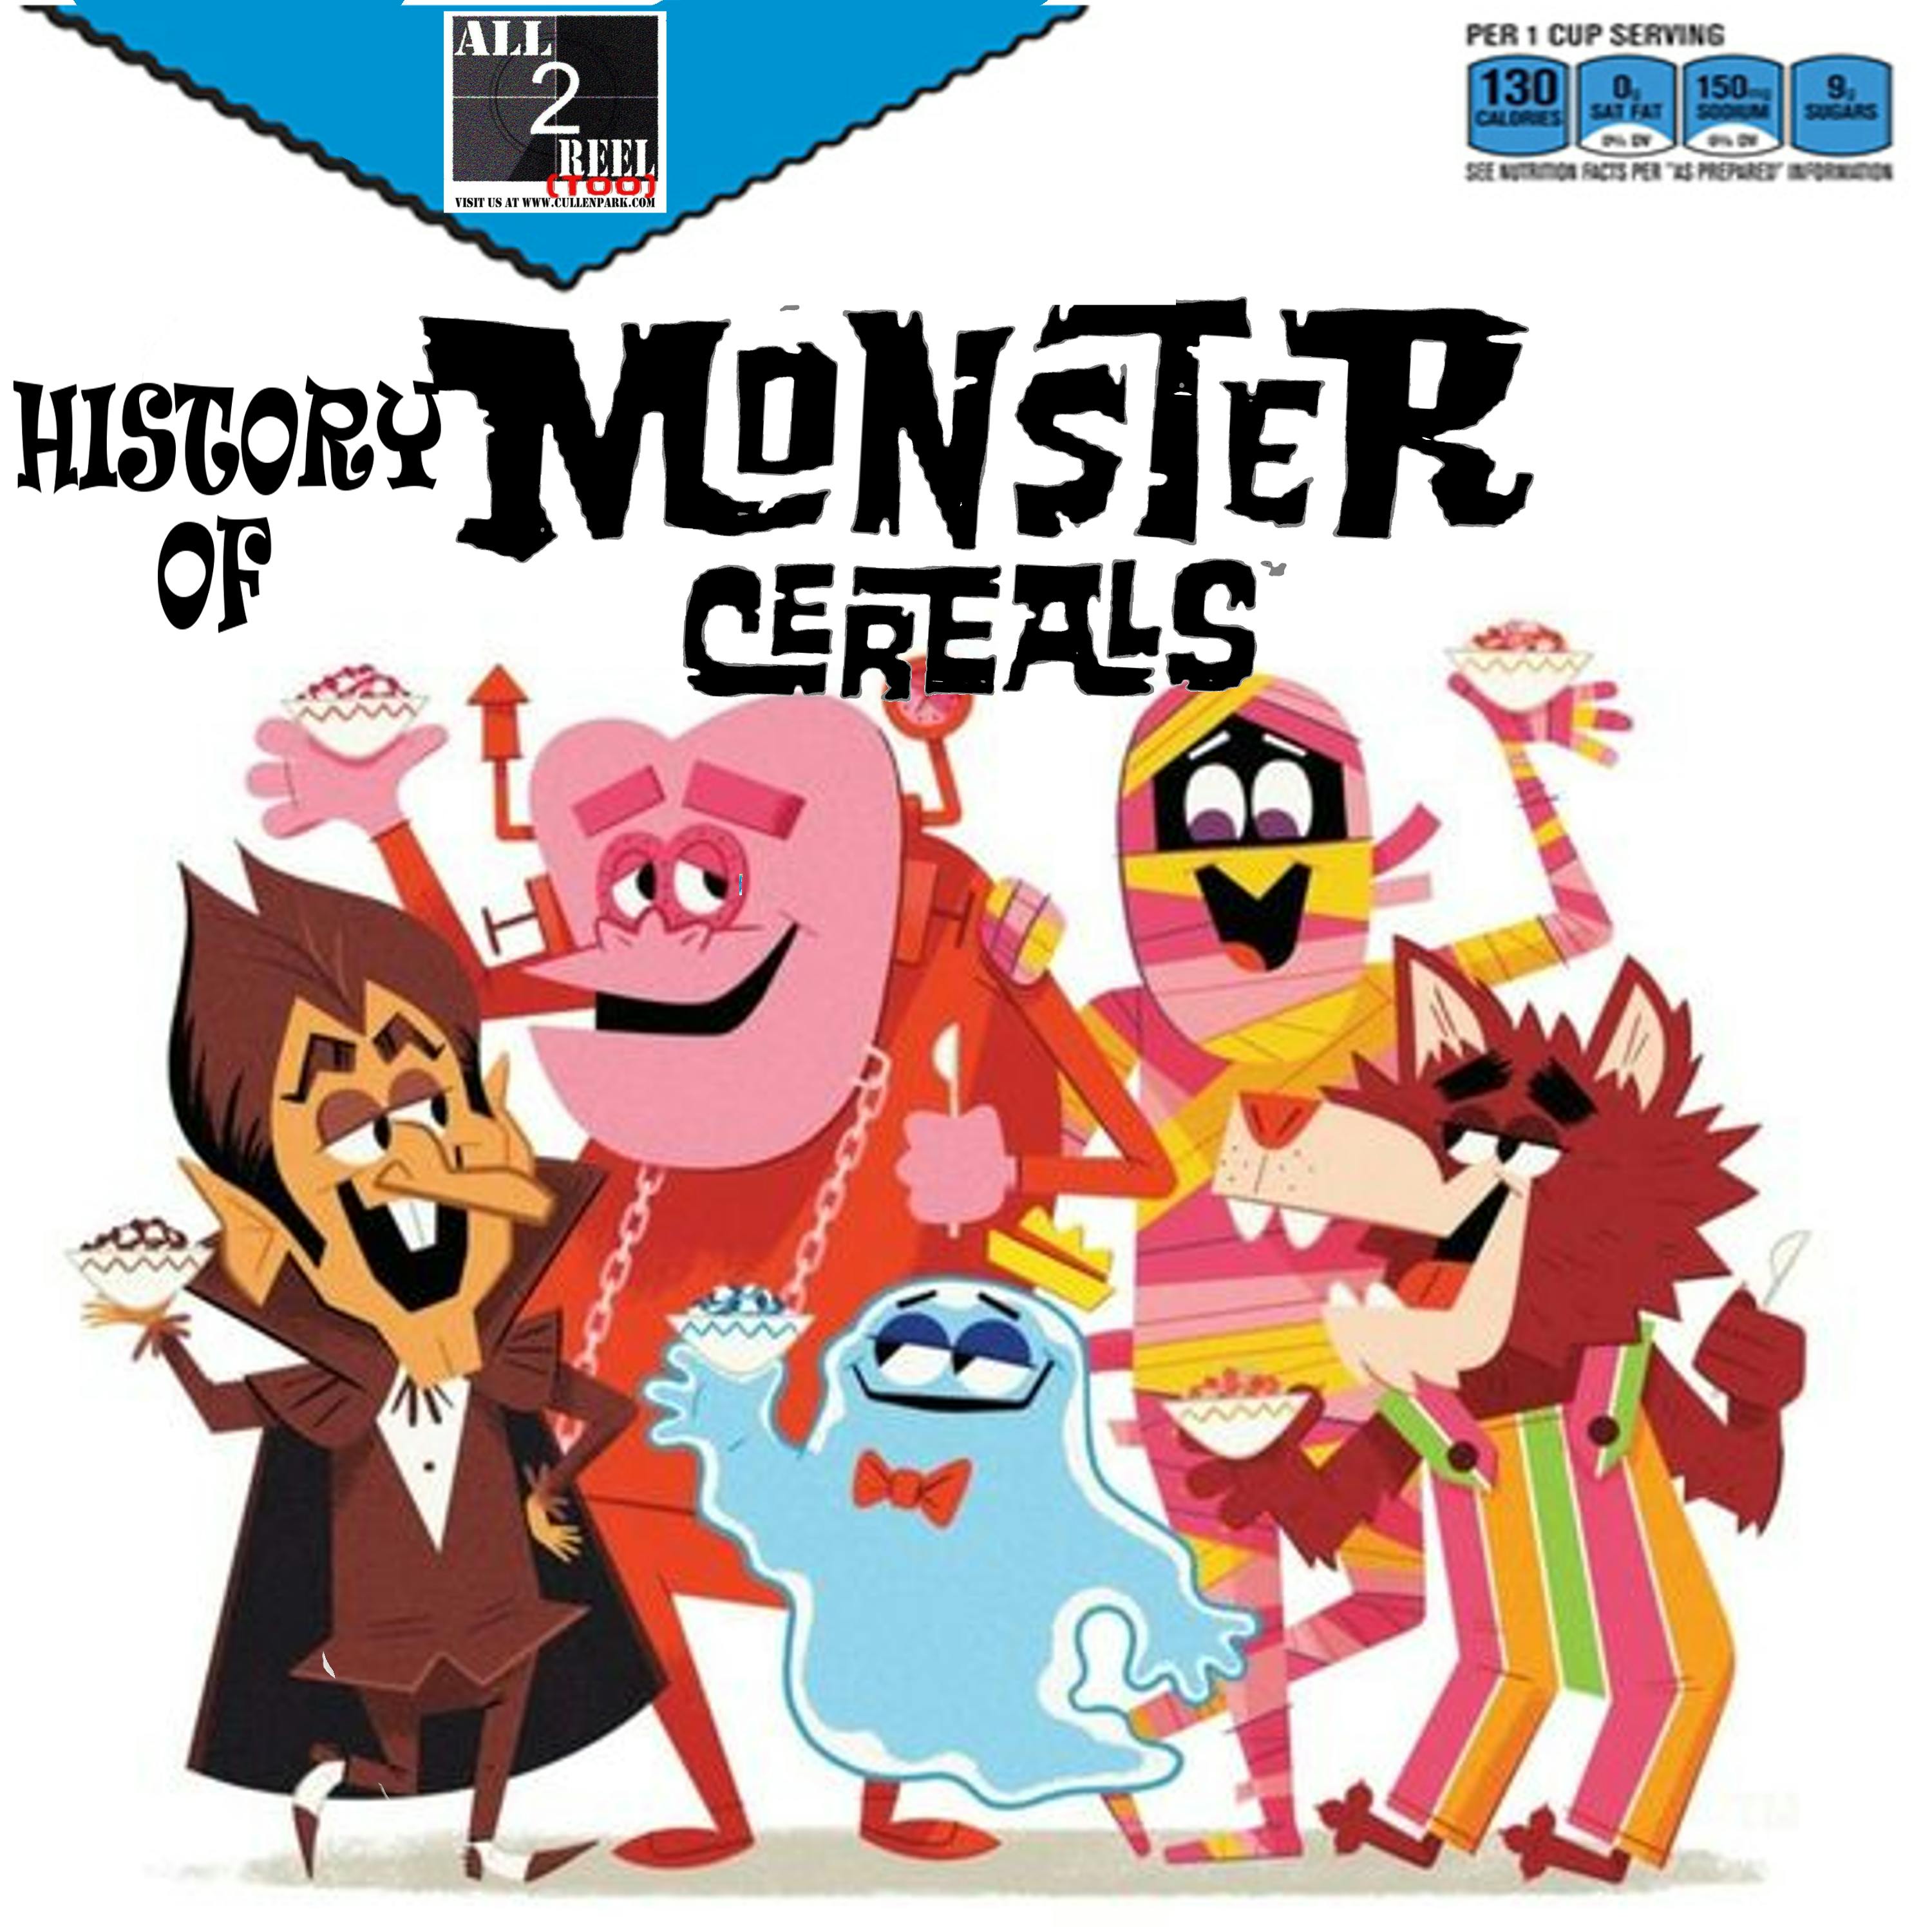 HISTORY OF MONSTER CEREALS Image